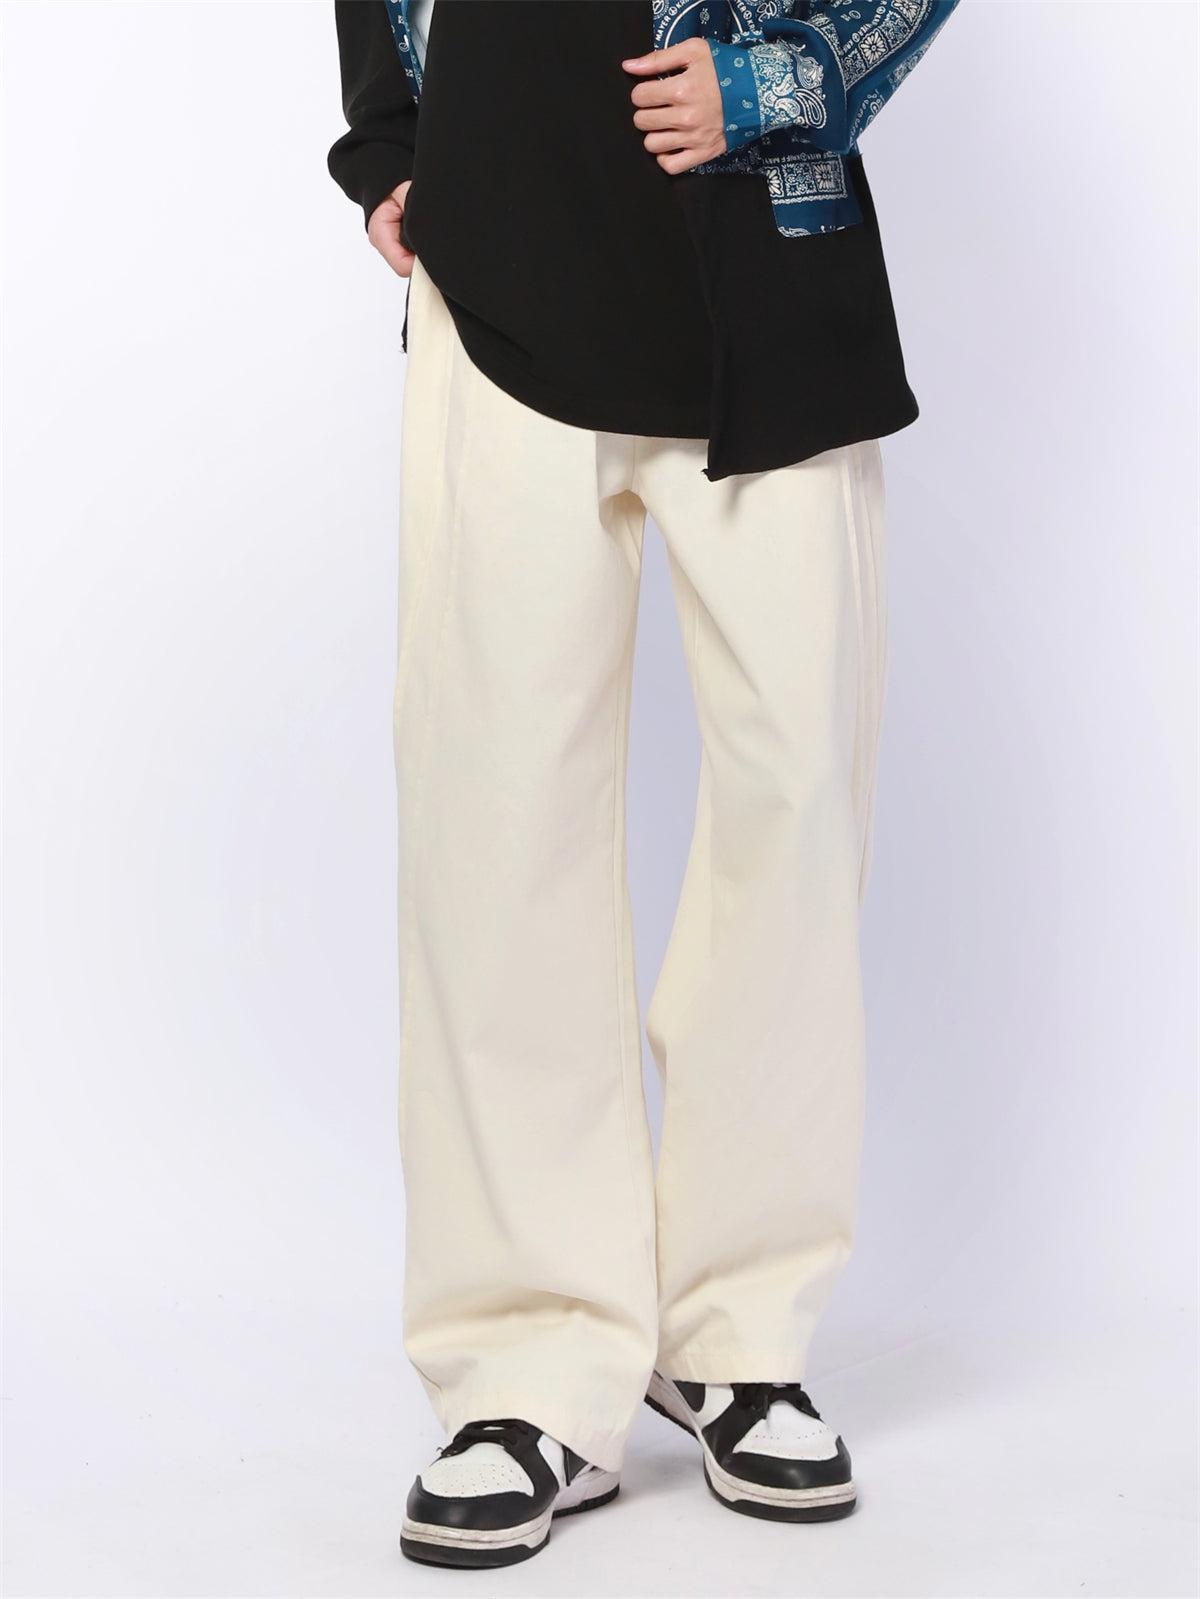 Side Seam Straight Cut Pants Korean Street Fashion Pants By Made Extreme Shop Online at OH Vault